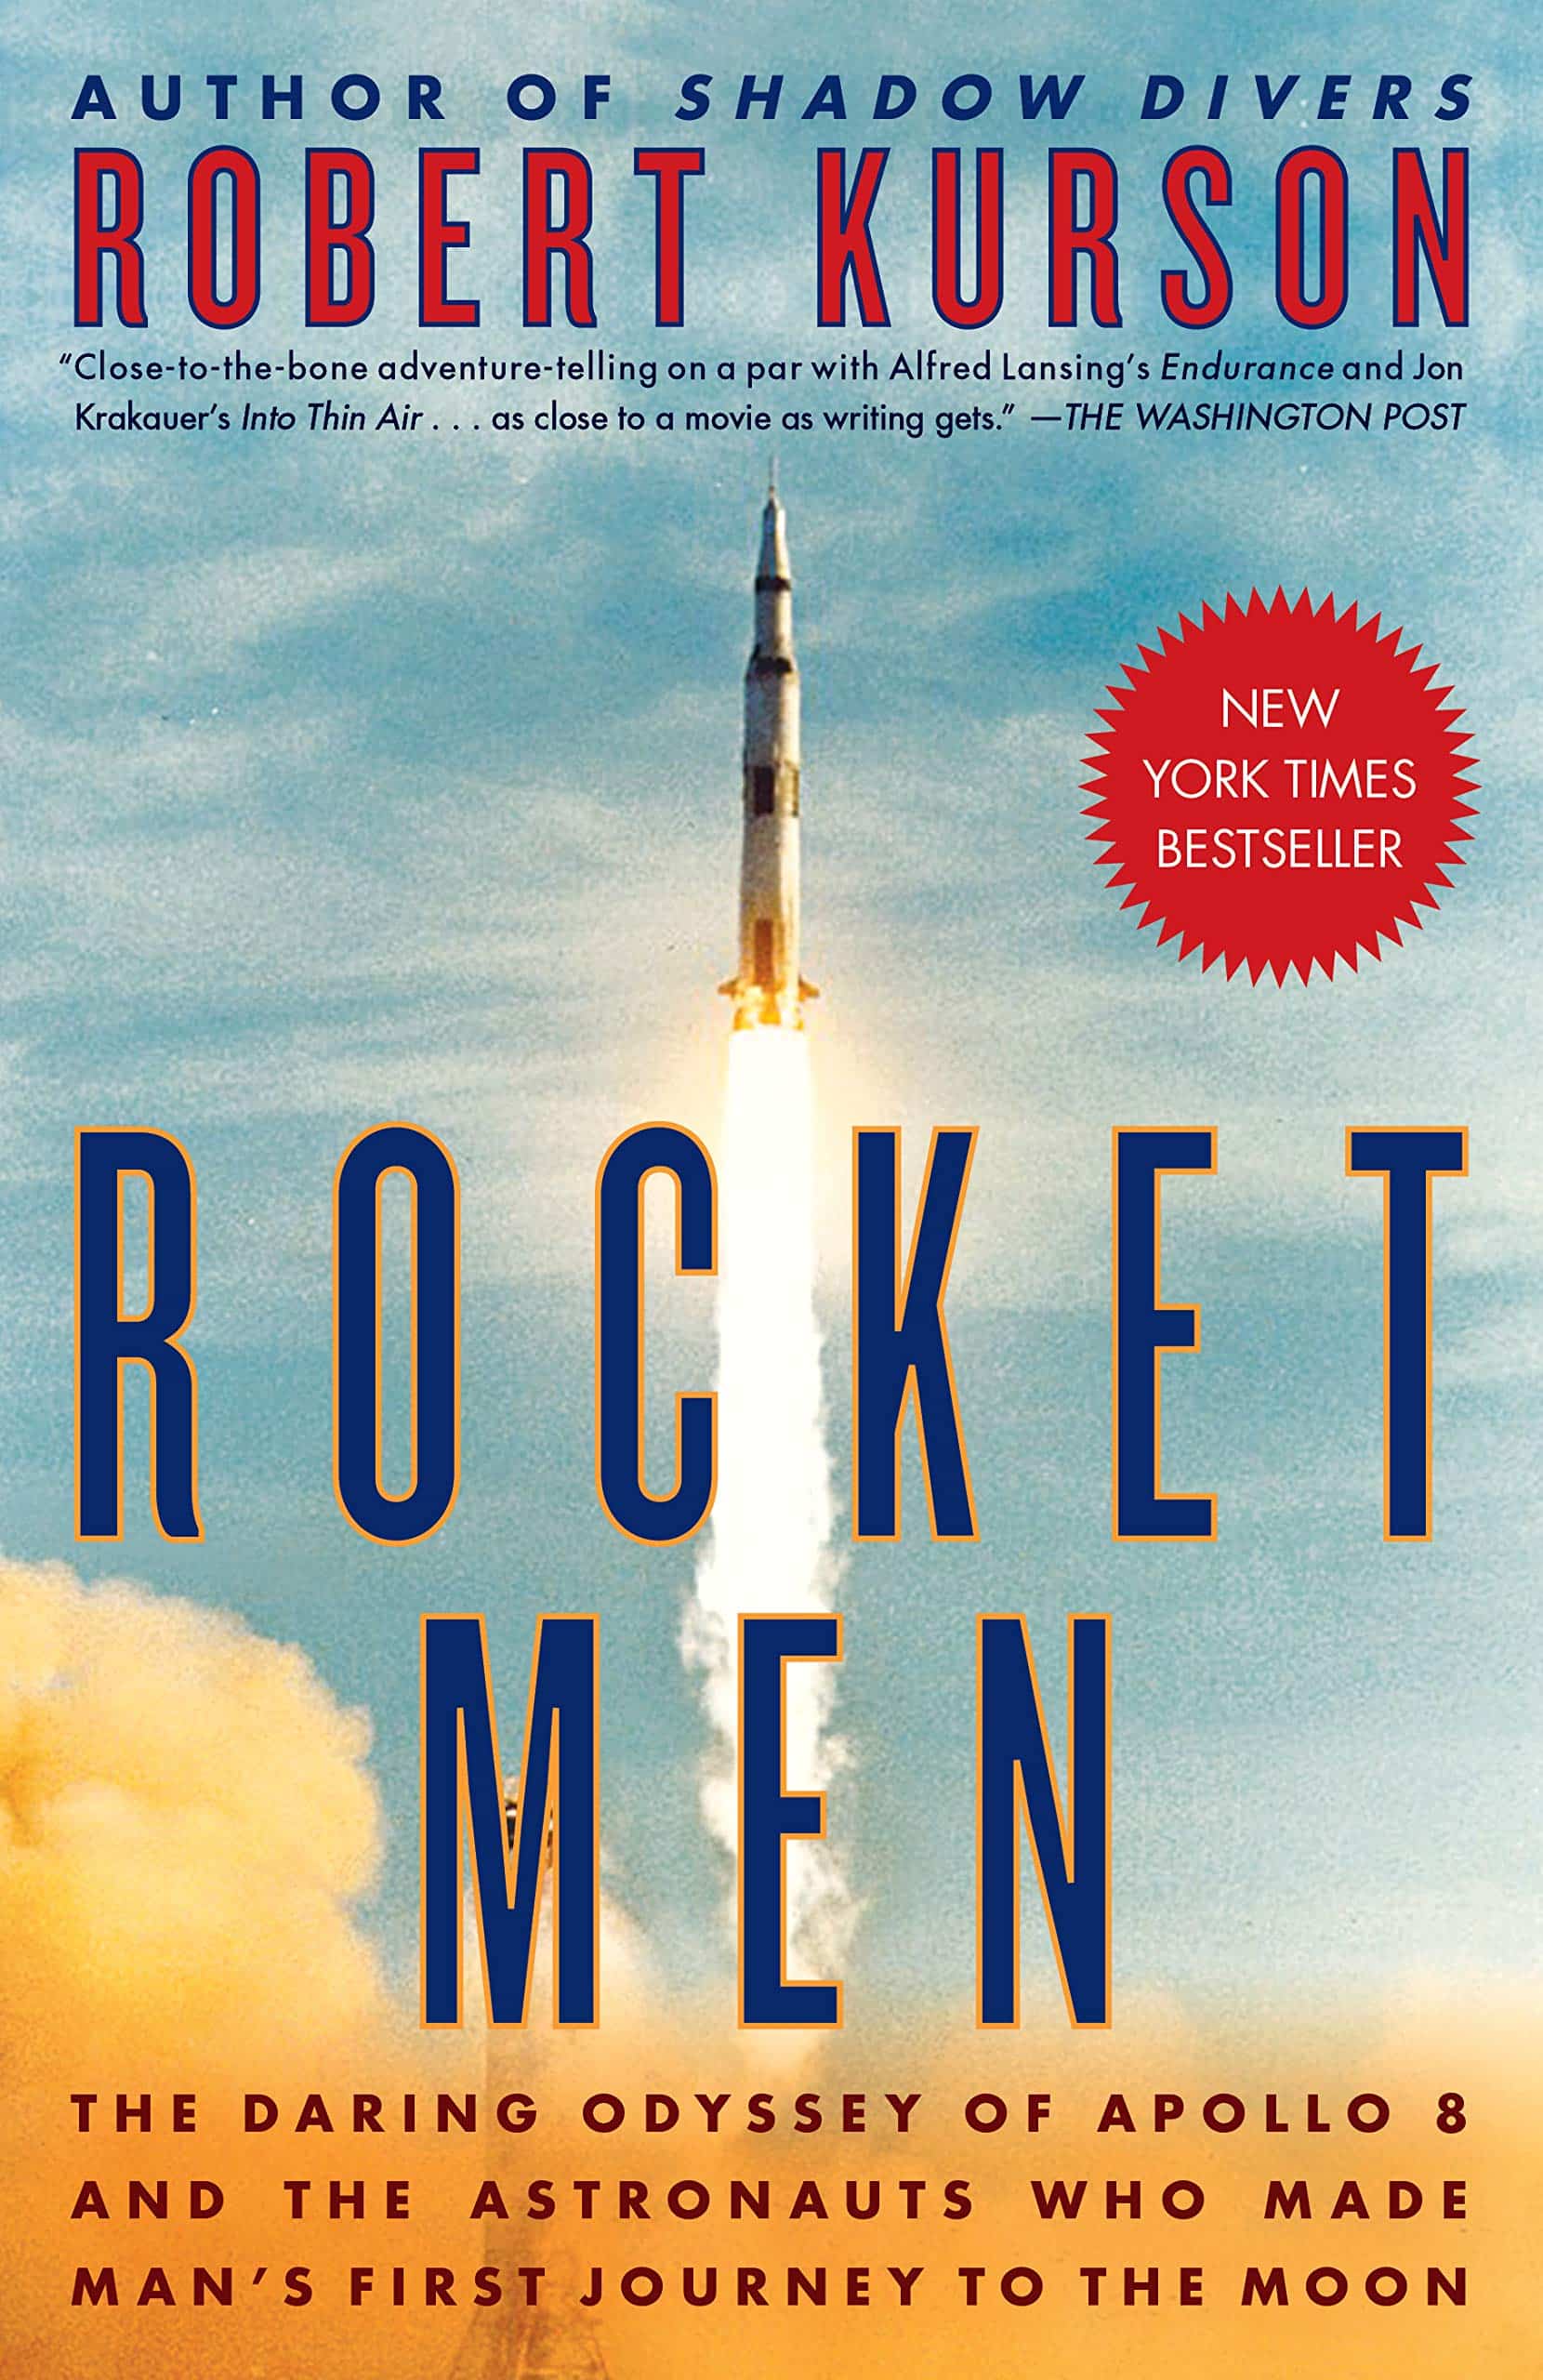 The cover of Rocket Men